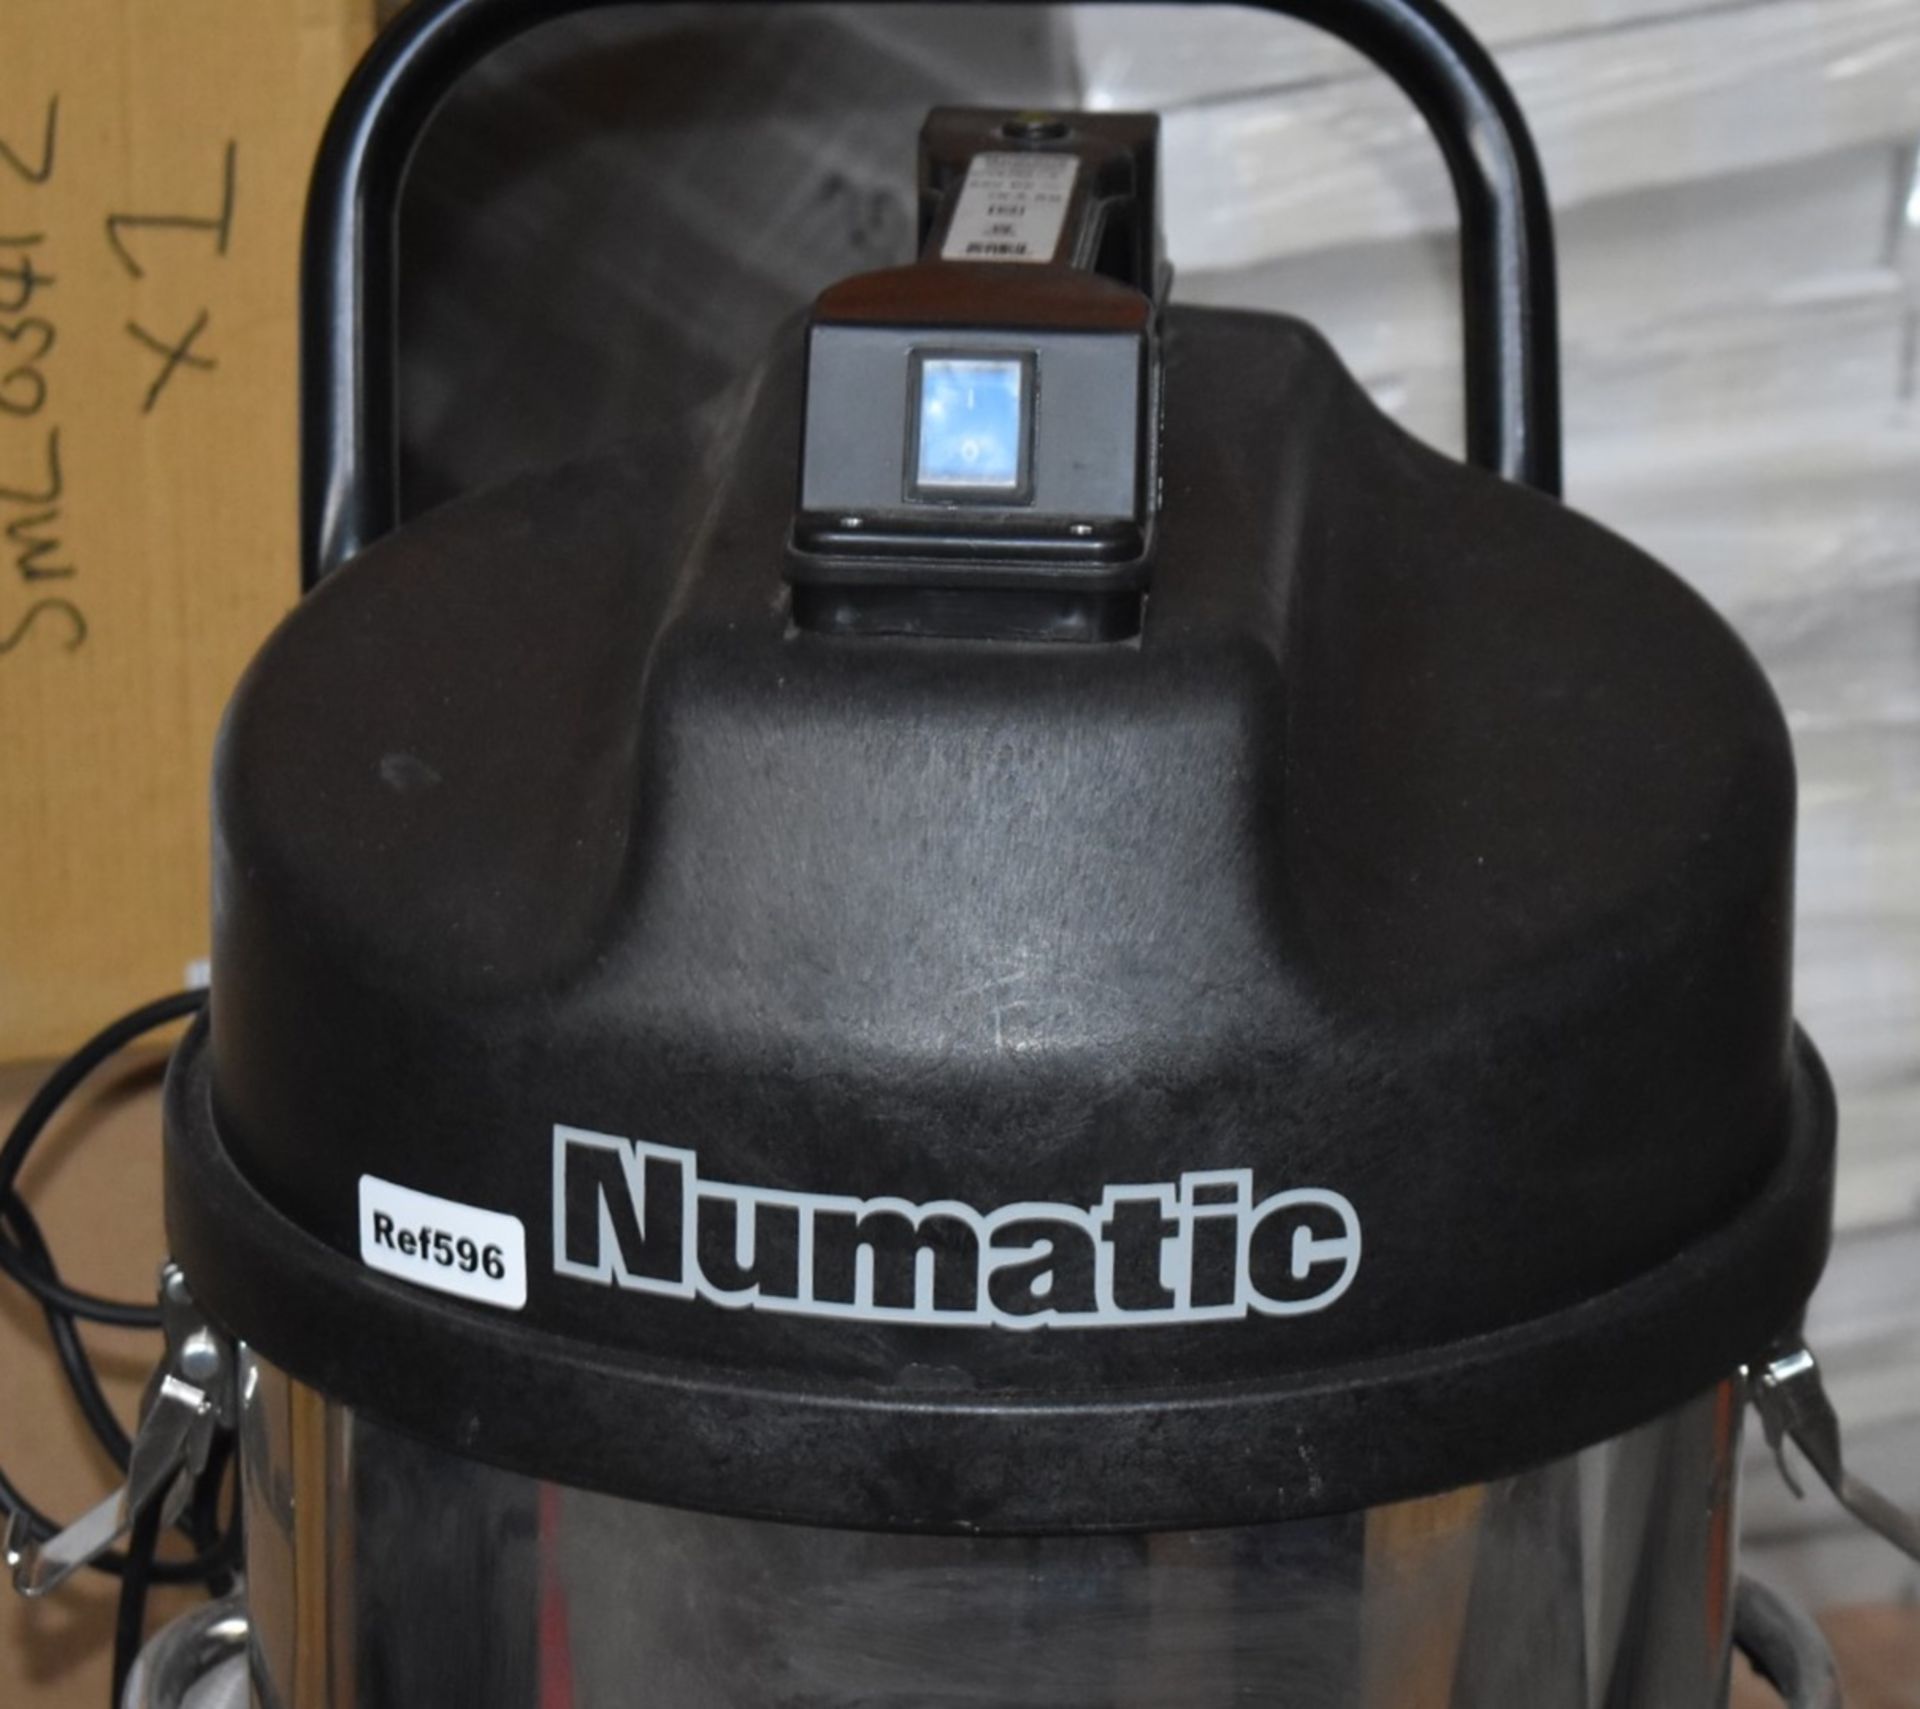 1 x Numatic WVDB750 Battery Powered Wet & Dry Vacuum Cleaner With Stainless Steel Body - Image 3 of 7